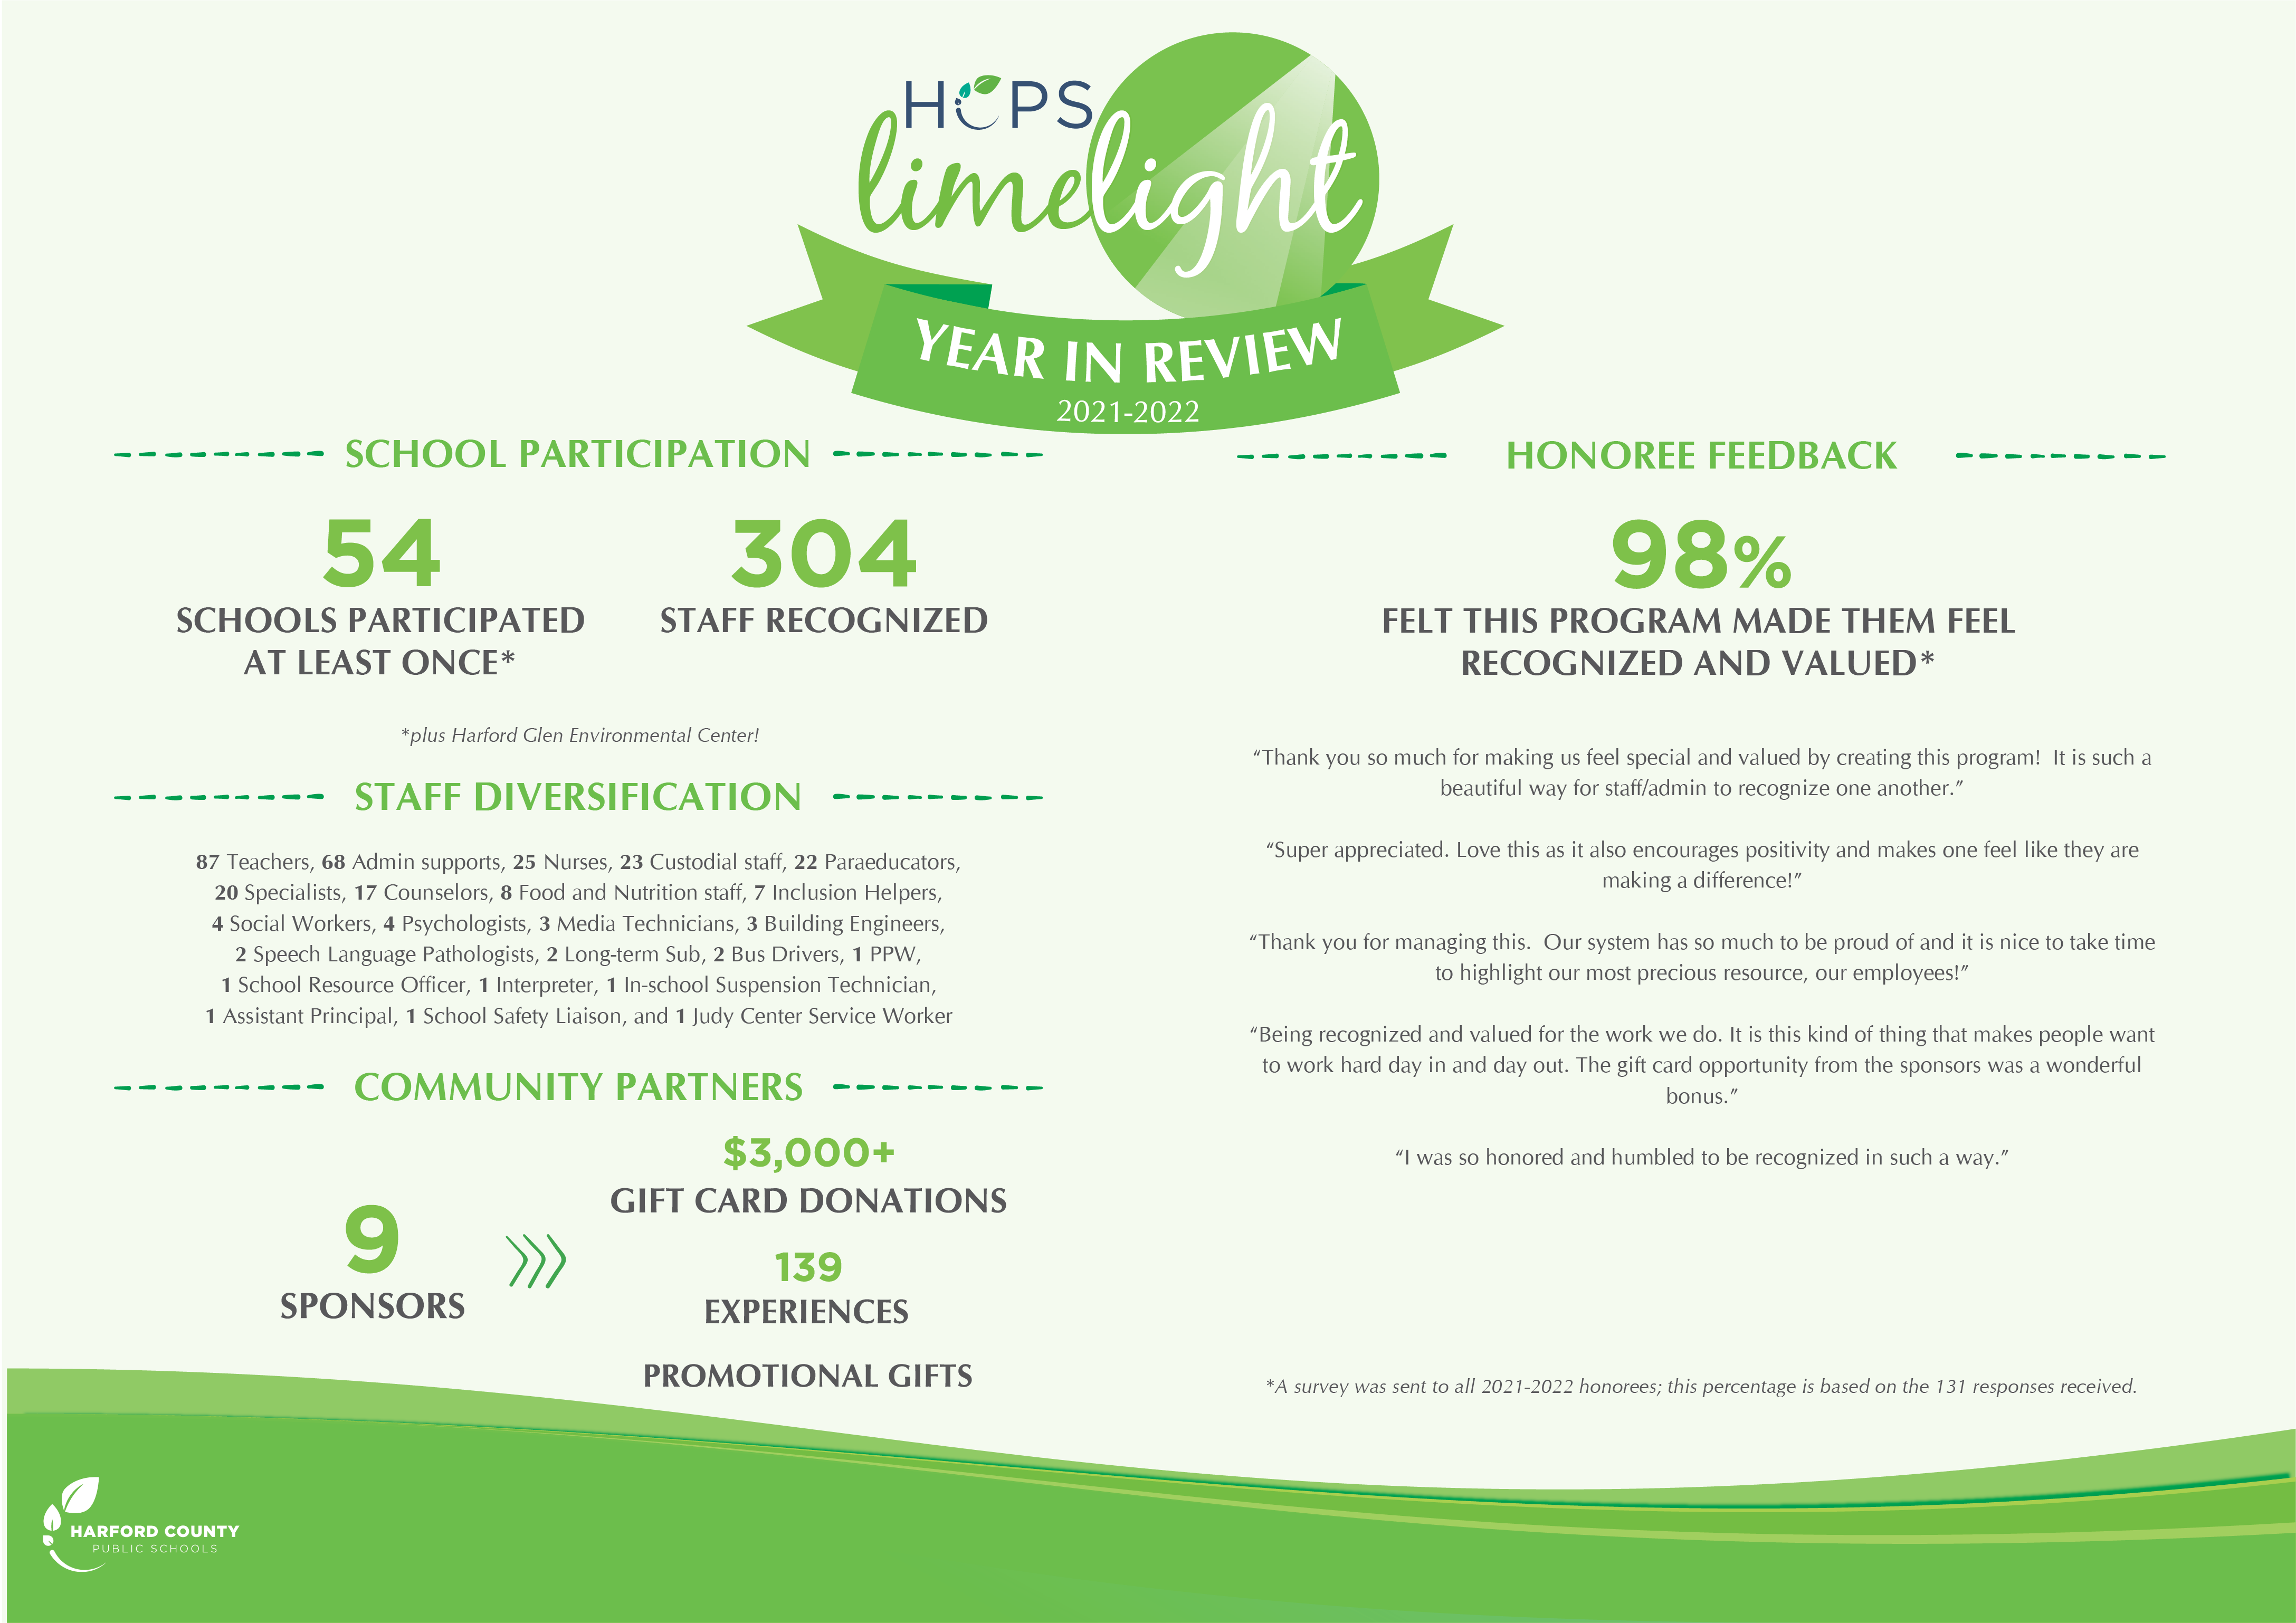 HCPS Limelight Year in Review